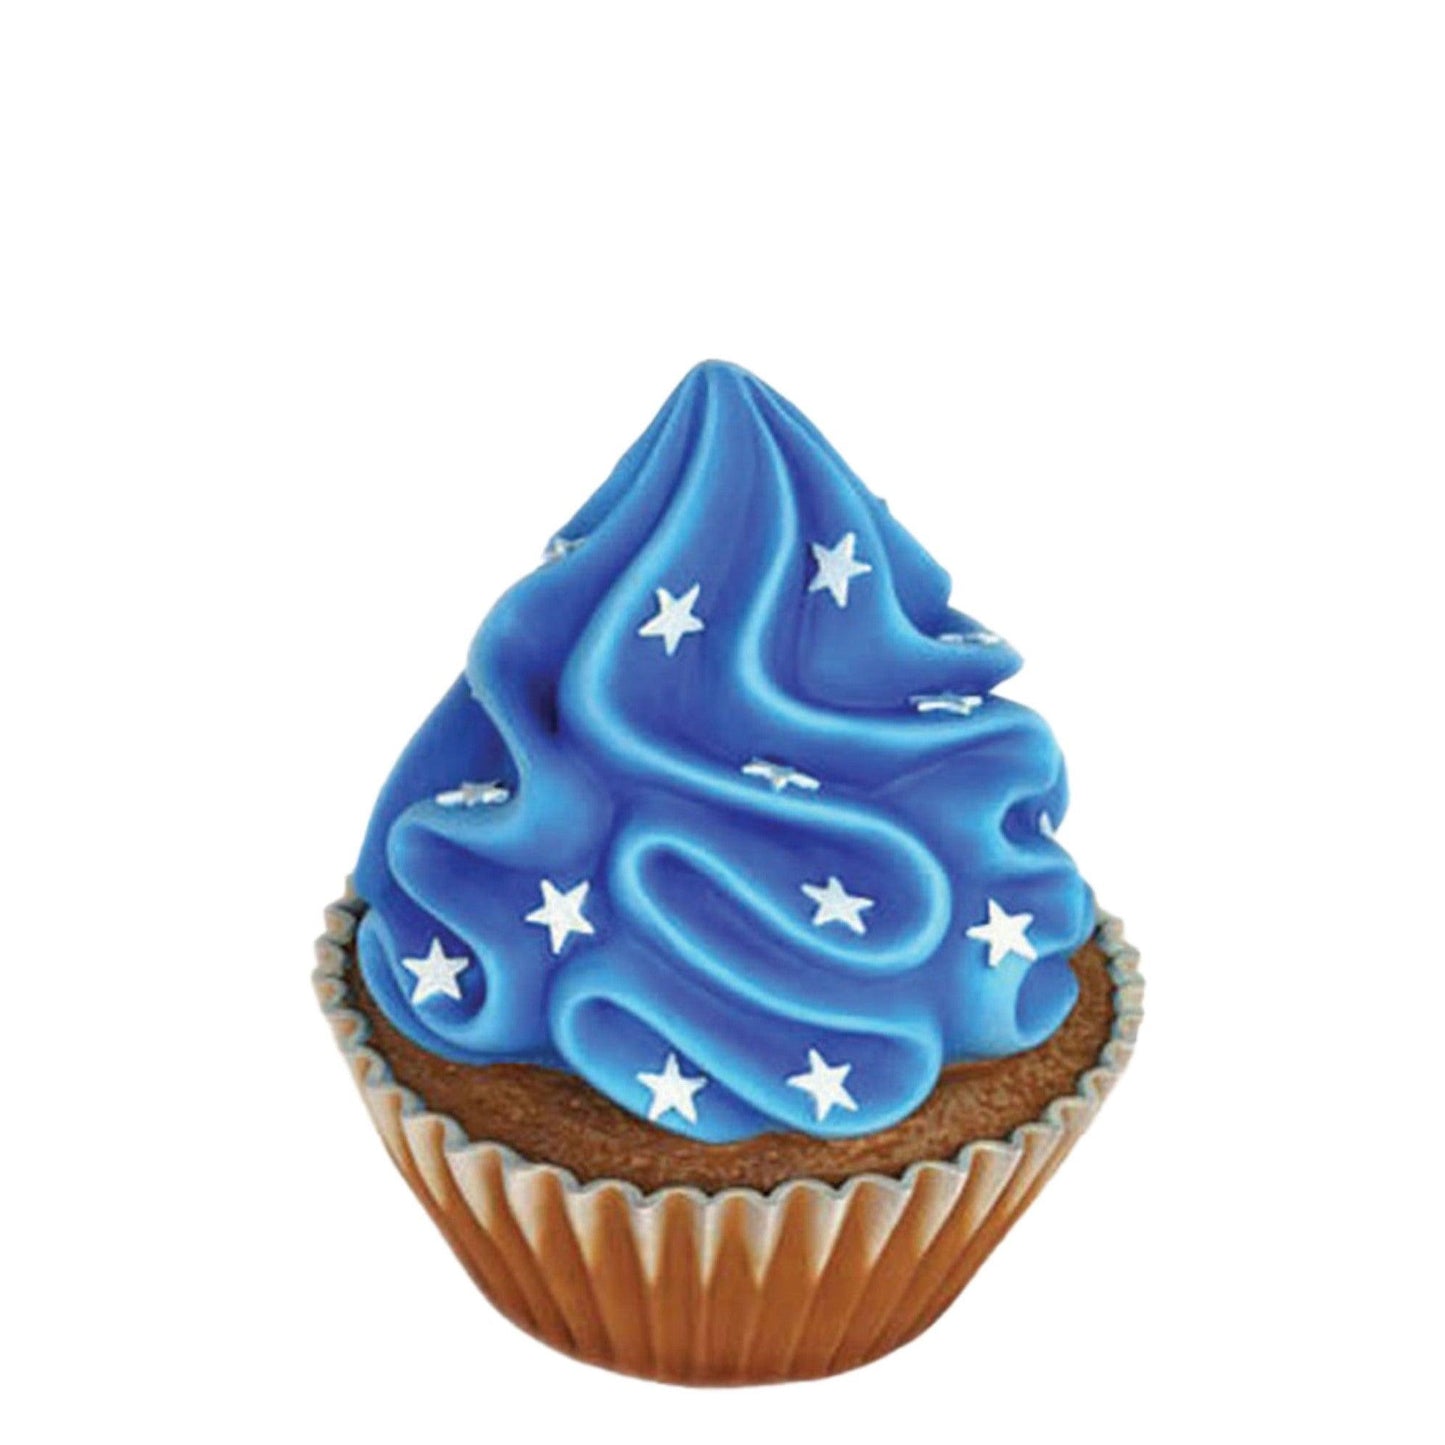 Bright Blue Cupcake With Stars Statue